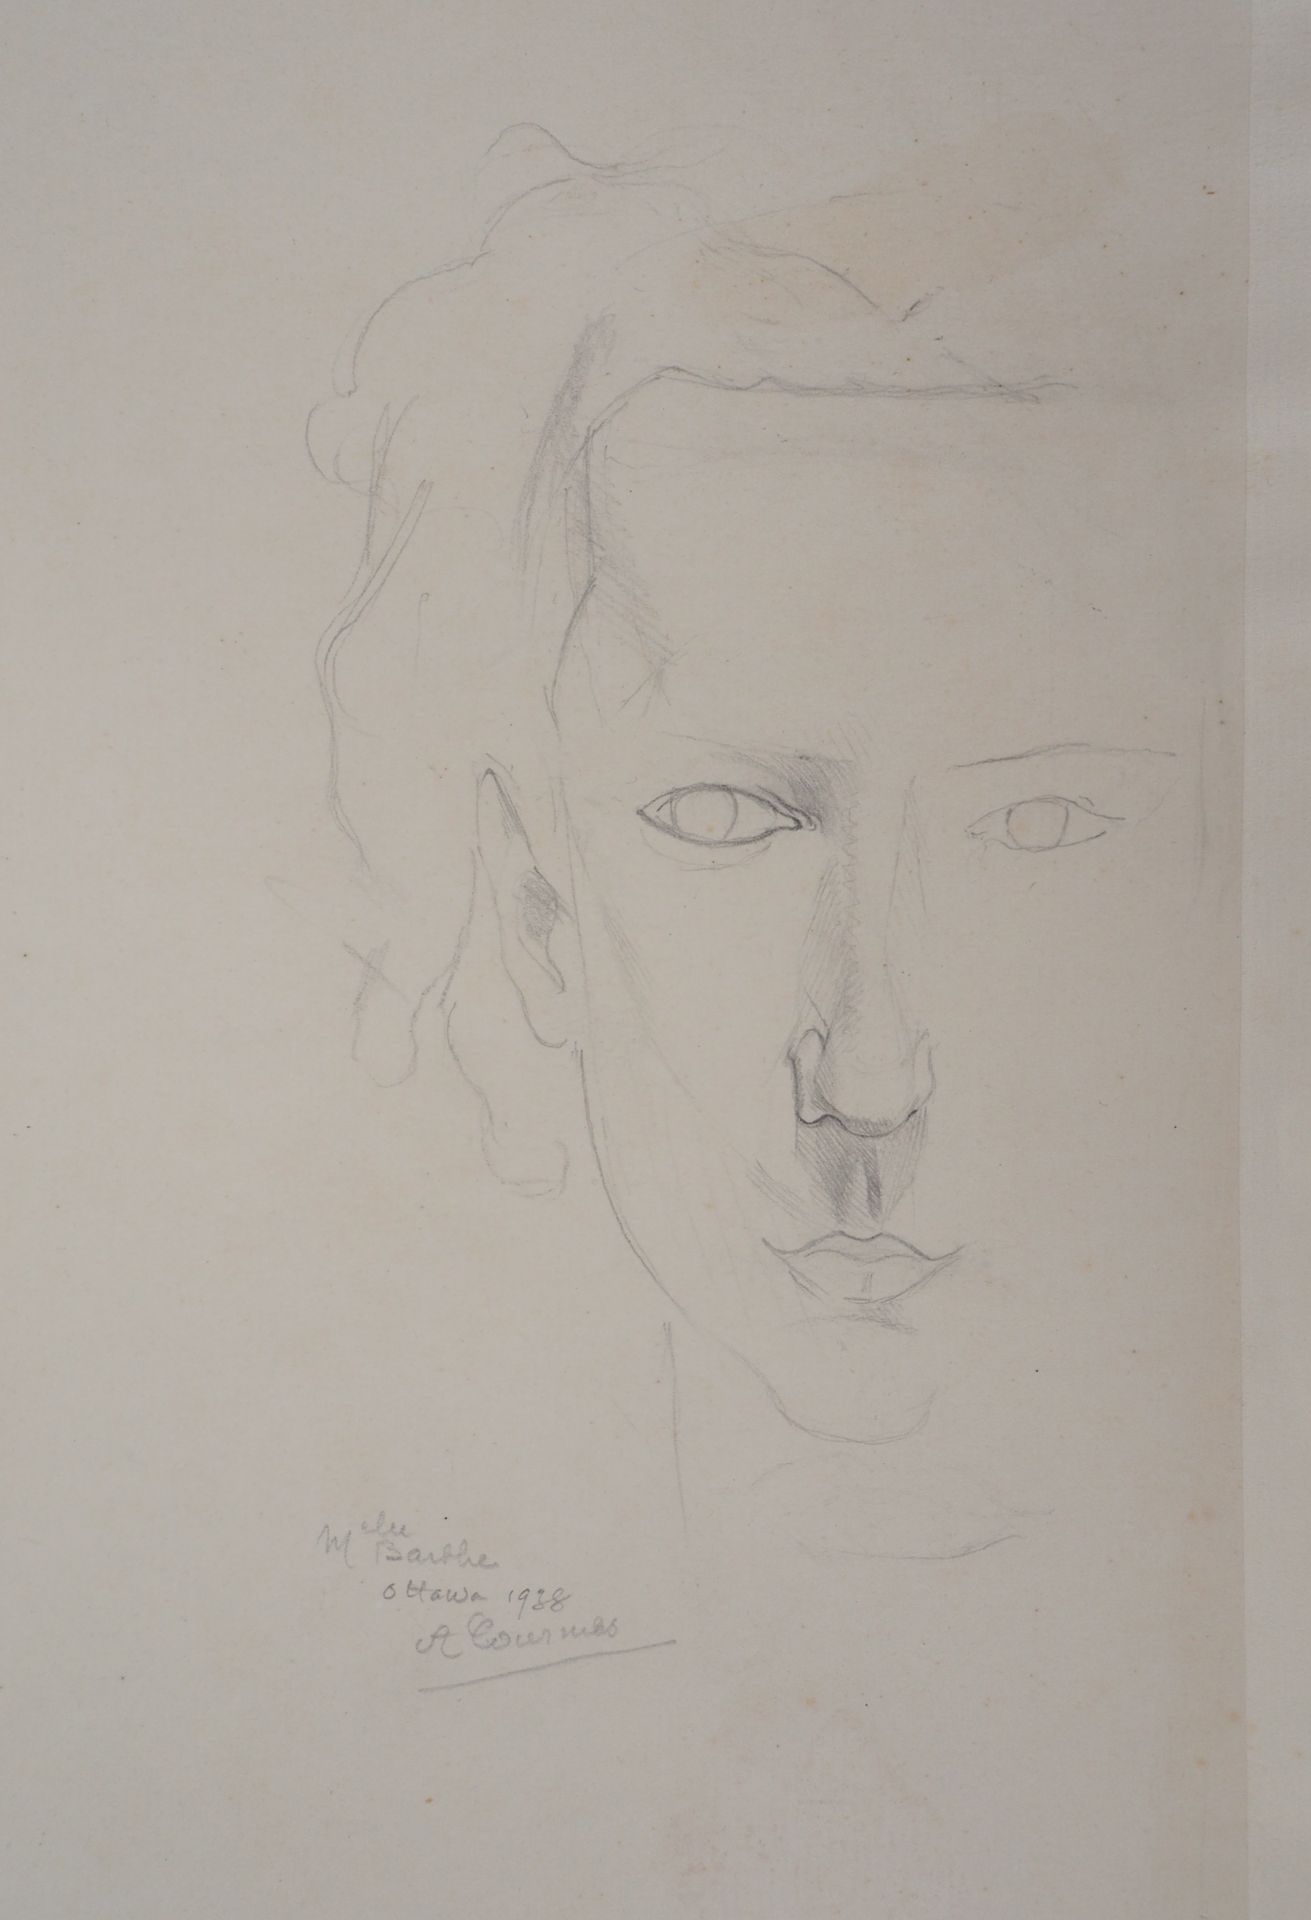 Alfred COURMES Alfred COURMES (1898-1993)

Rostro de mujer, 1938

Dibujo a lápiz&hellip;